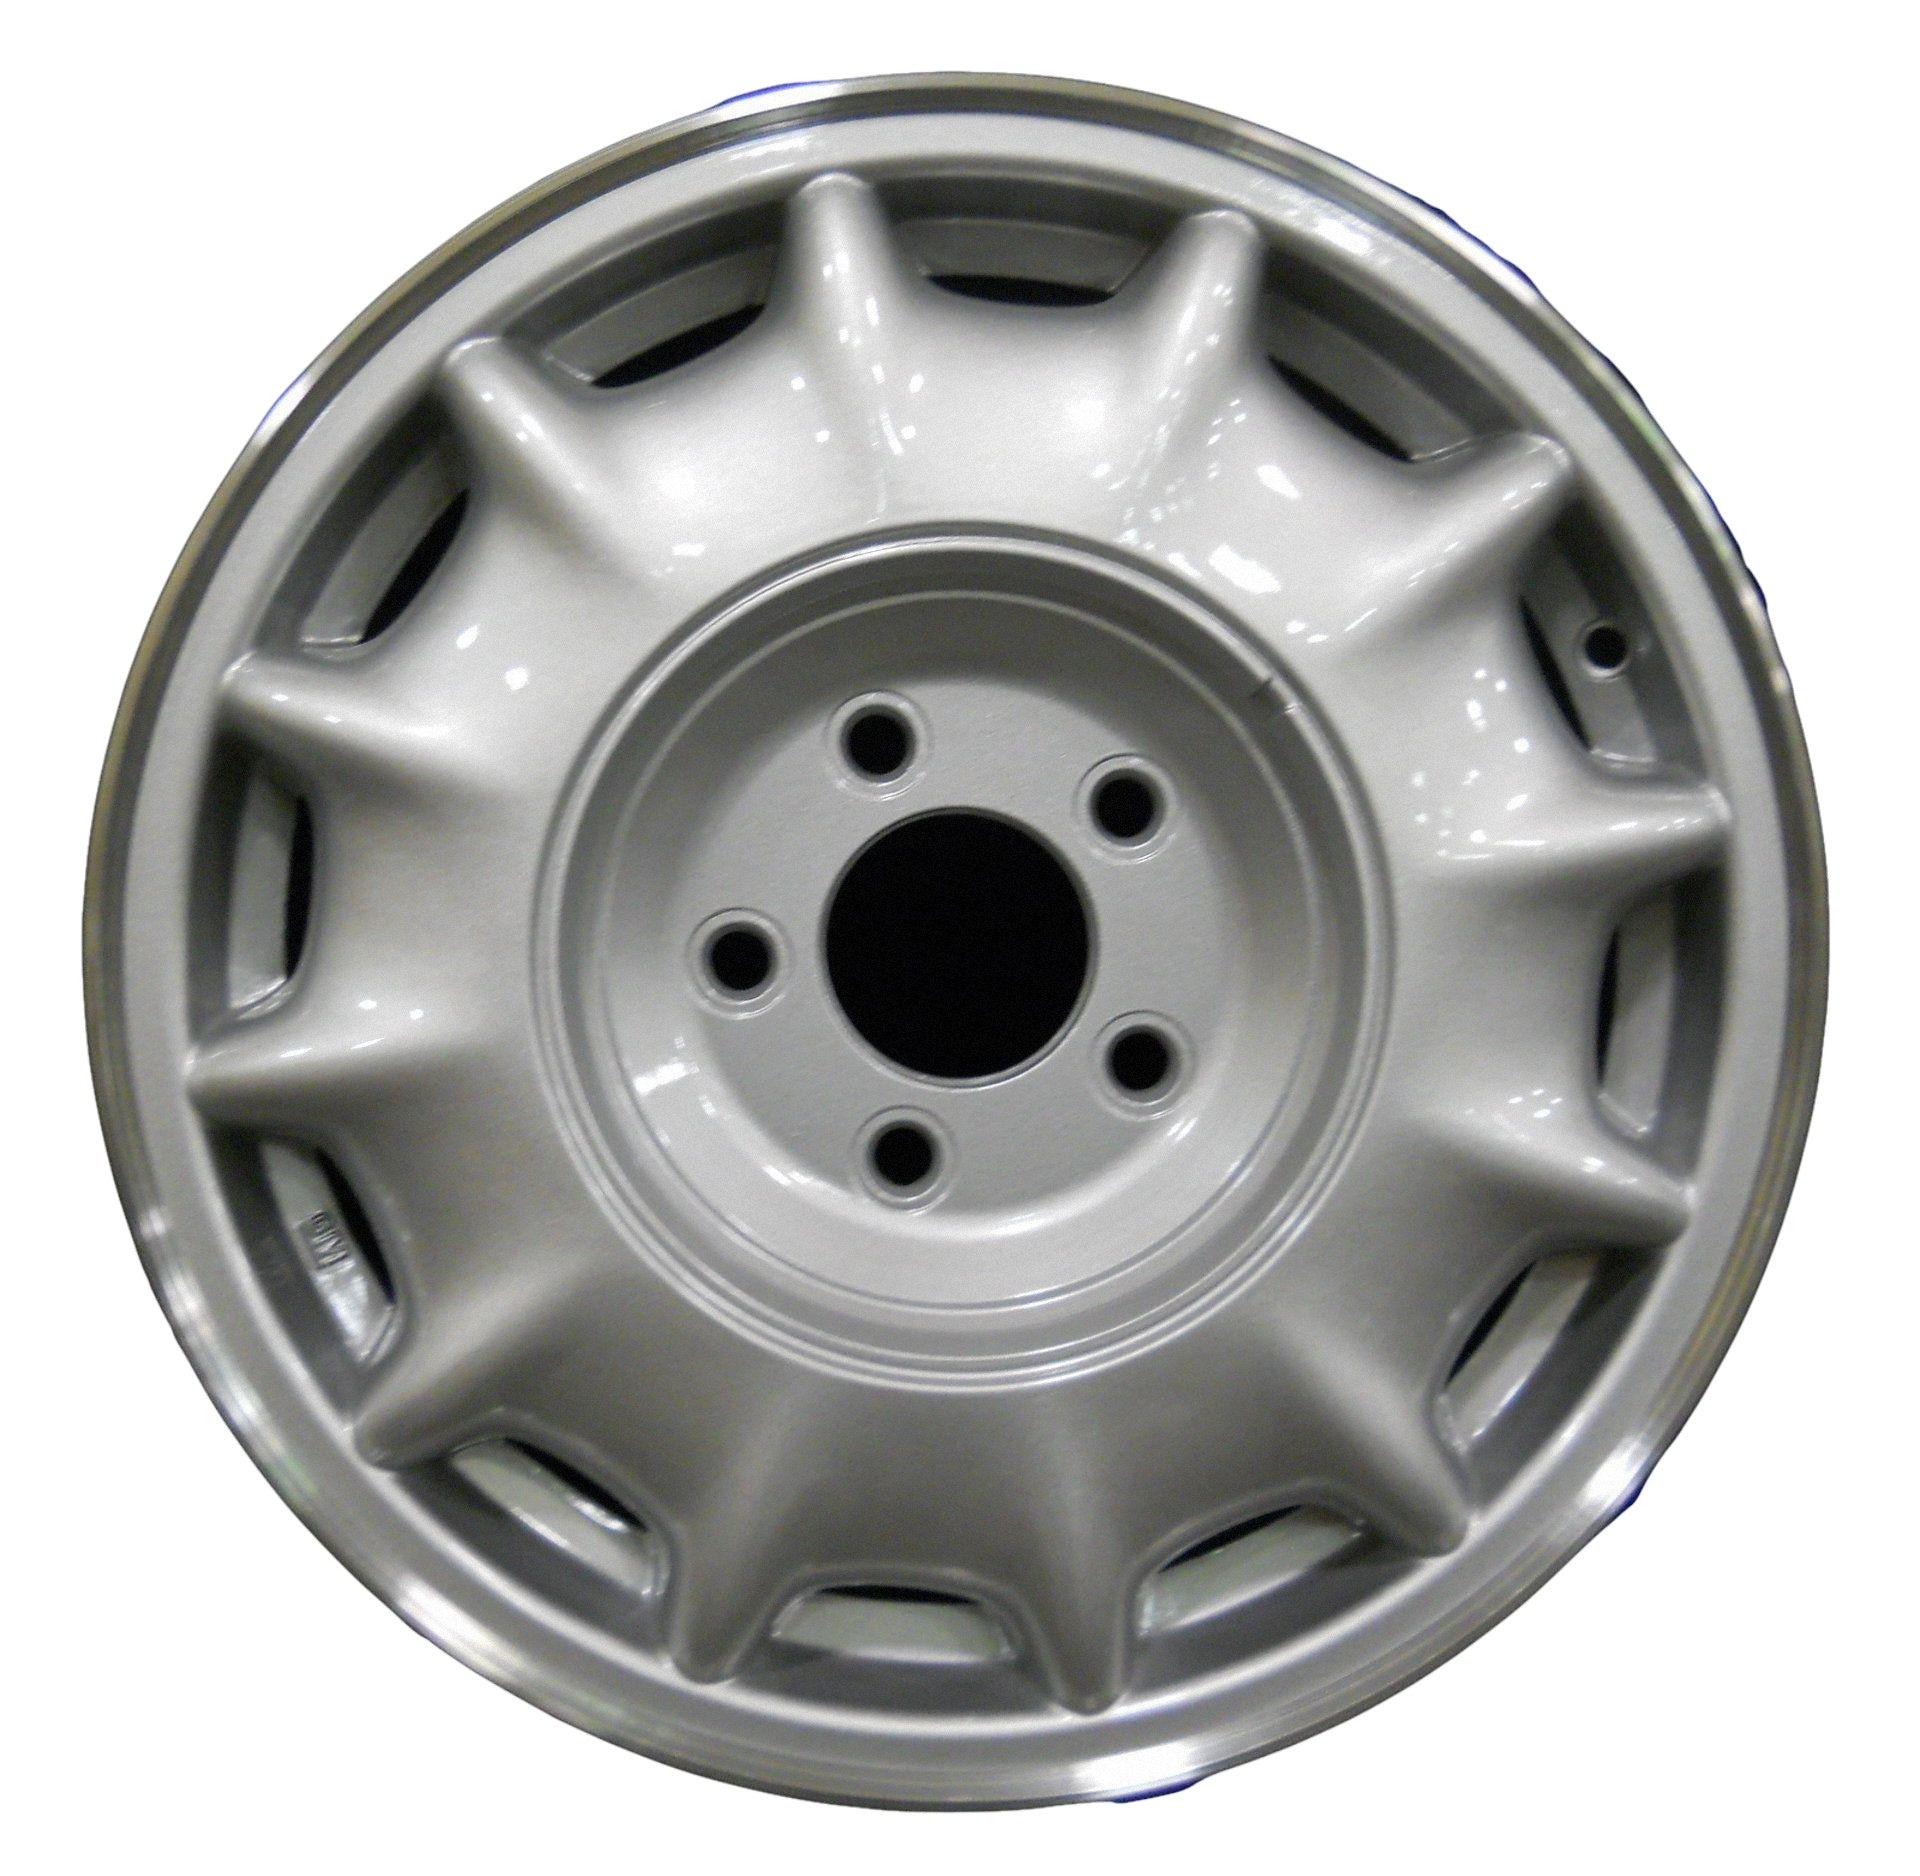 Buick Park Avenue  1997, 1998, 1999, 2000, 2001 Factory OEM Car Wheel Size 16x6.5 Alloy WAO.4022.PS02.LC